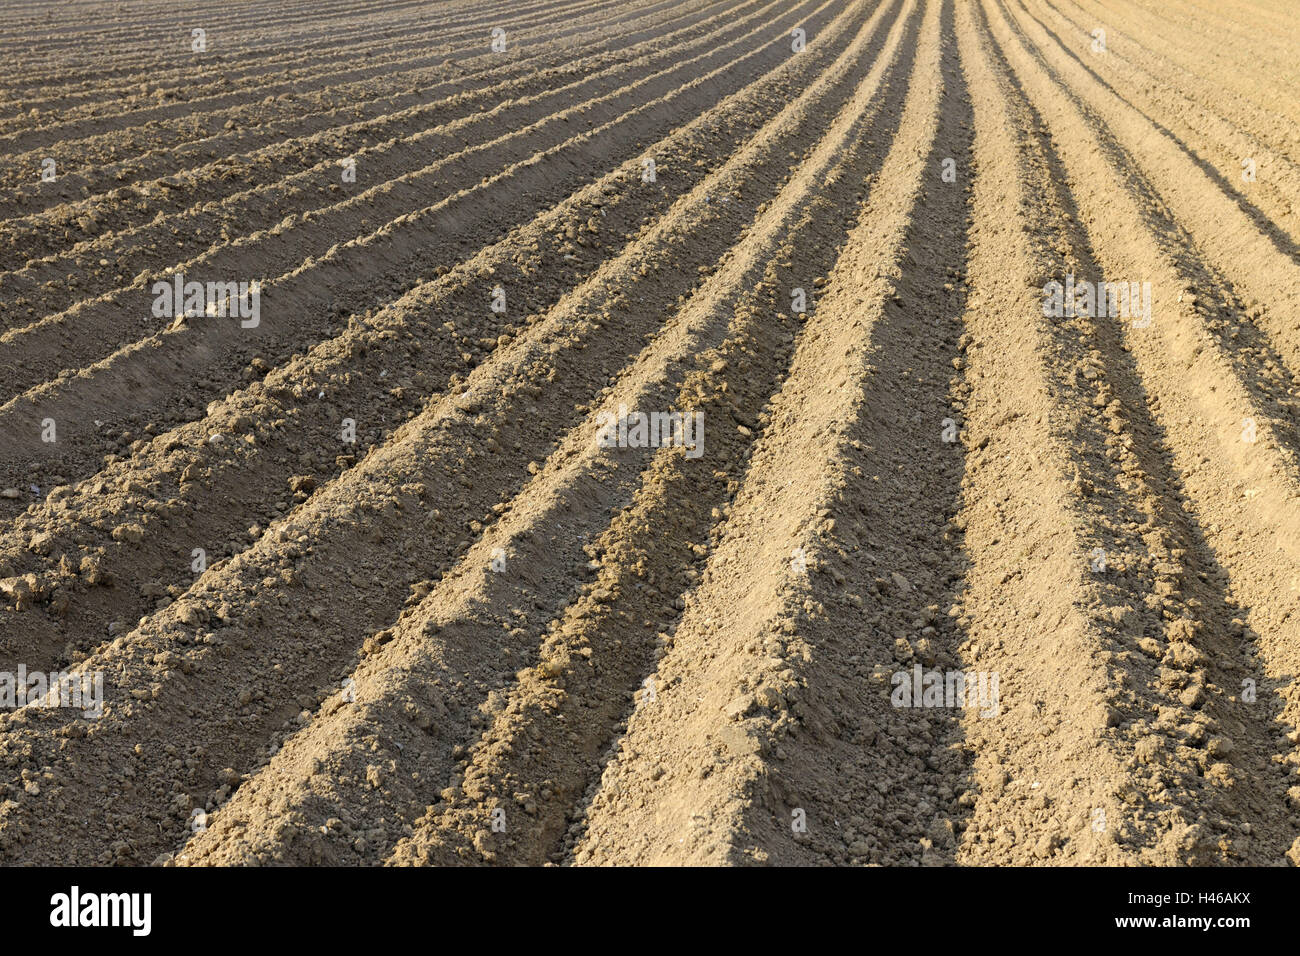 Potato field, field, country living, ground, forms, potato field, potatoes, lines, nature, grooves, growth phase, agriculture, earthworks, grooves, cultivation potatoes, conception, structure, cultivation, field, same moderation, sample, agriculture, Bade Stock Photo